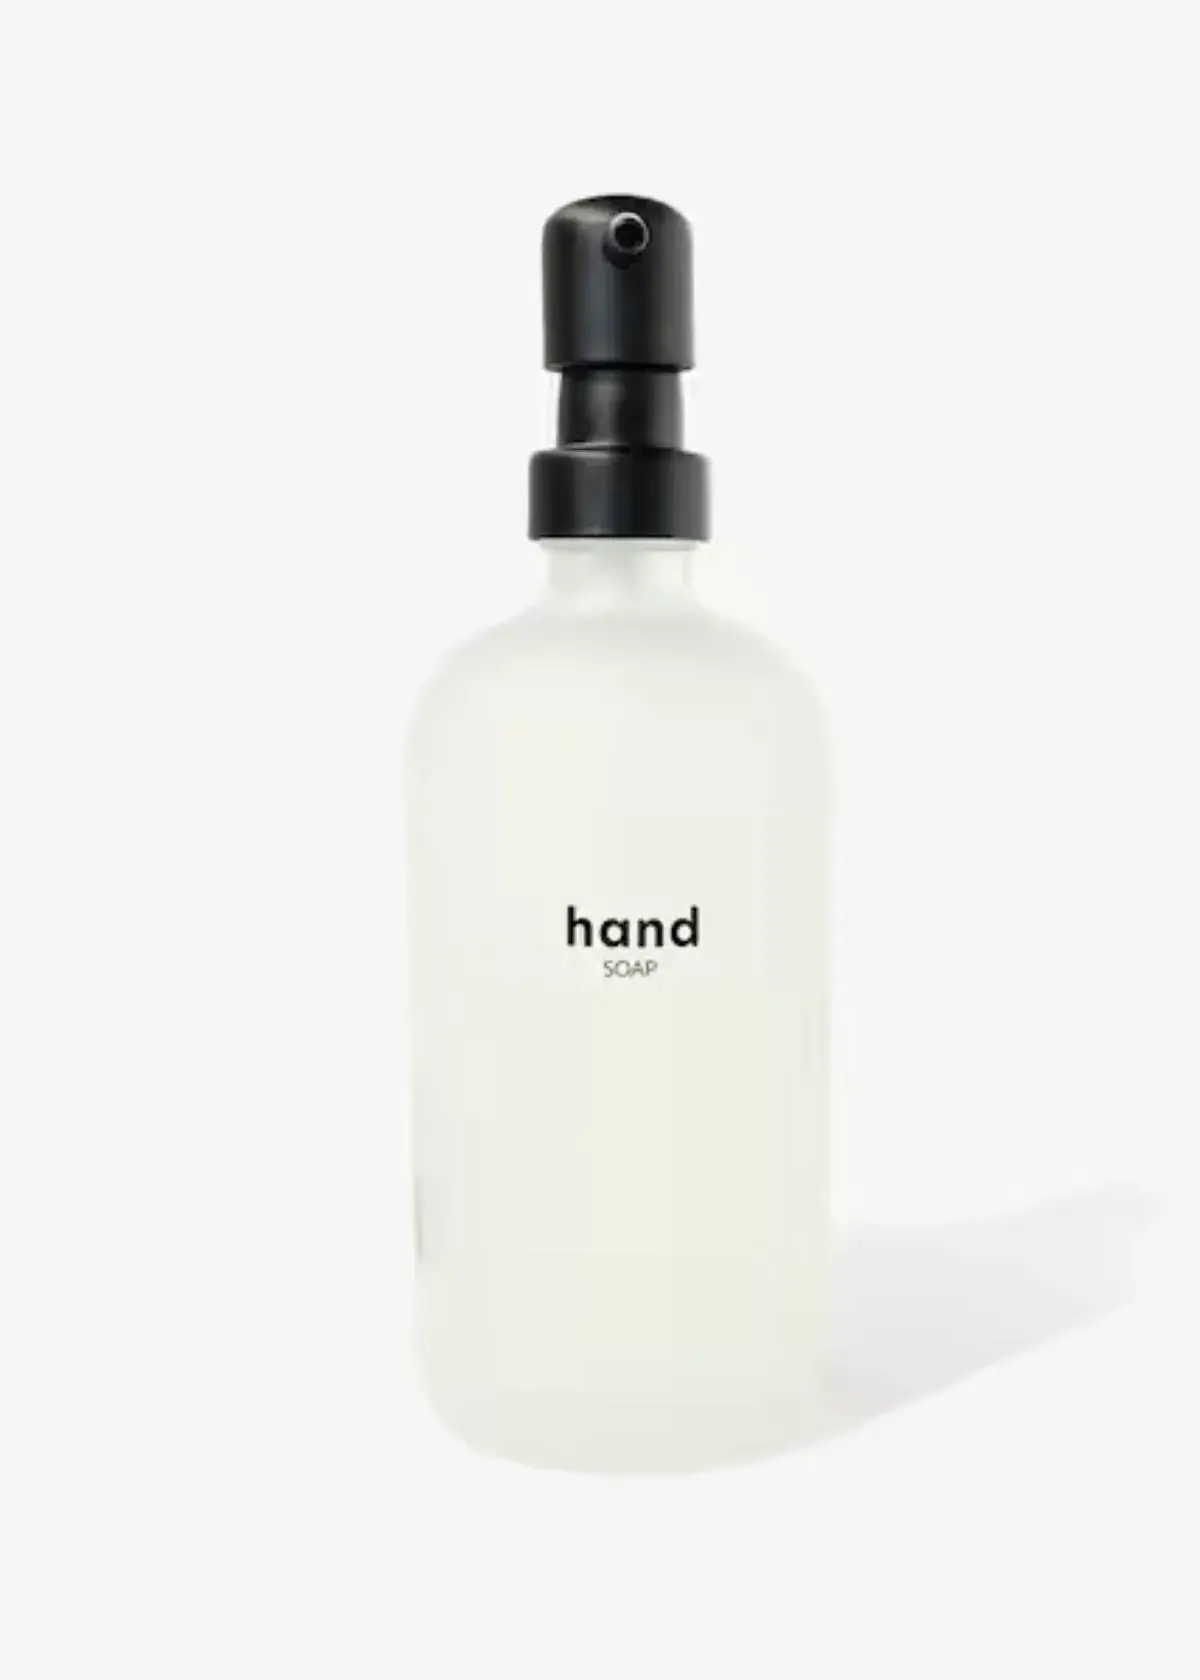 How to choose the right organic hand soap?